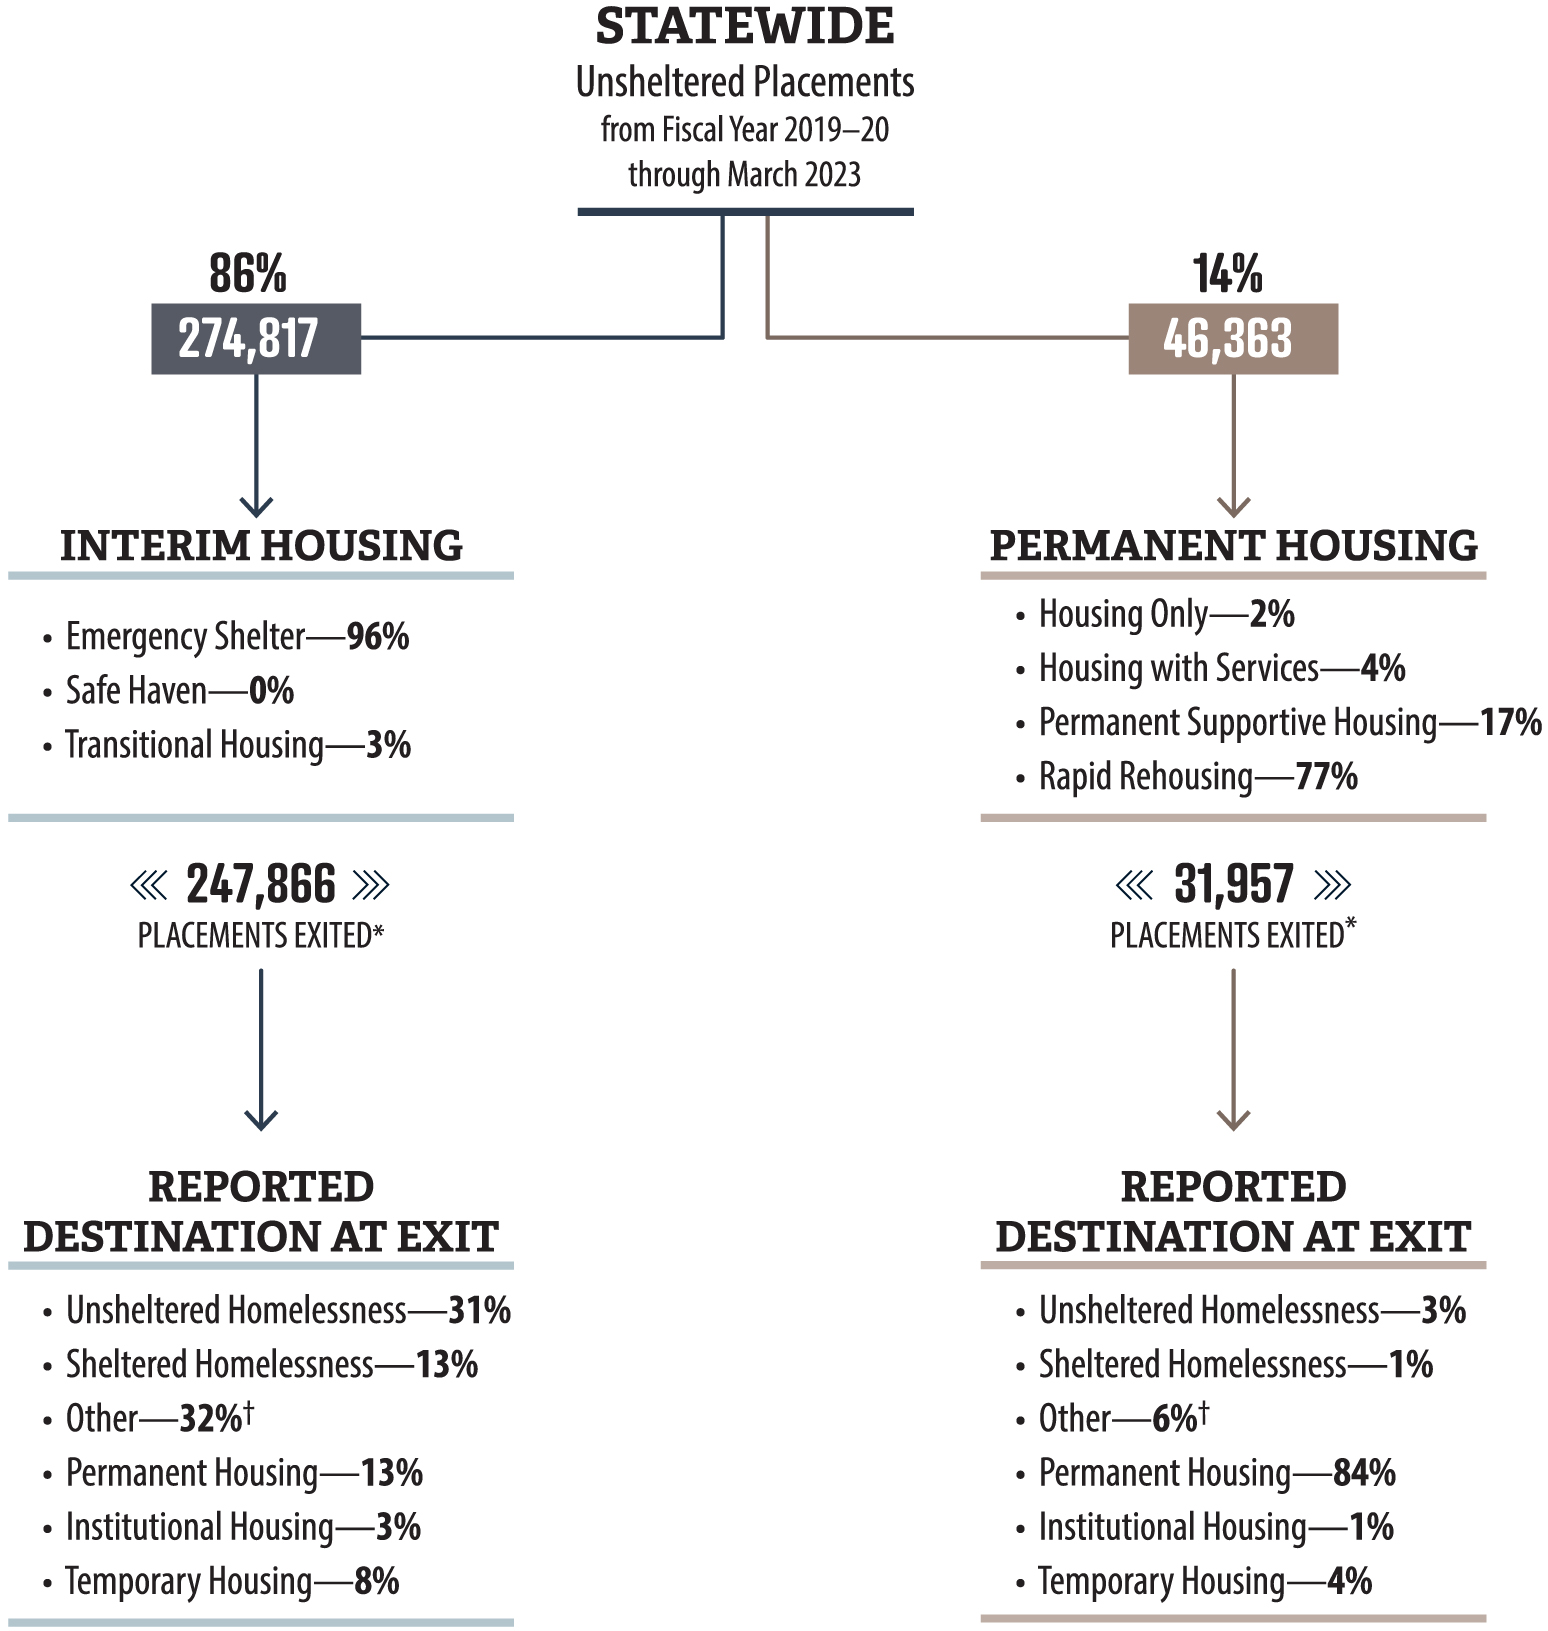 Figure 6, a tree diagram depicting the total placements of individuals experiencing unsheltered homelessness into interim and/or permanent housing types from the fiscal year 2019-20 through March 2023.